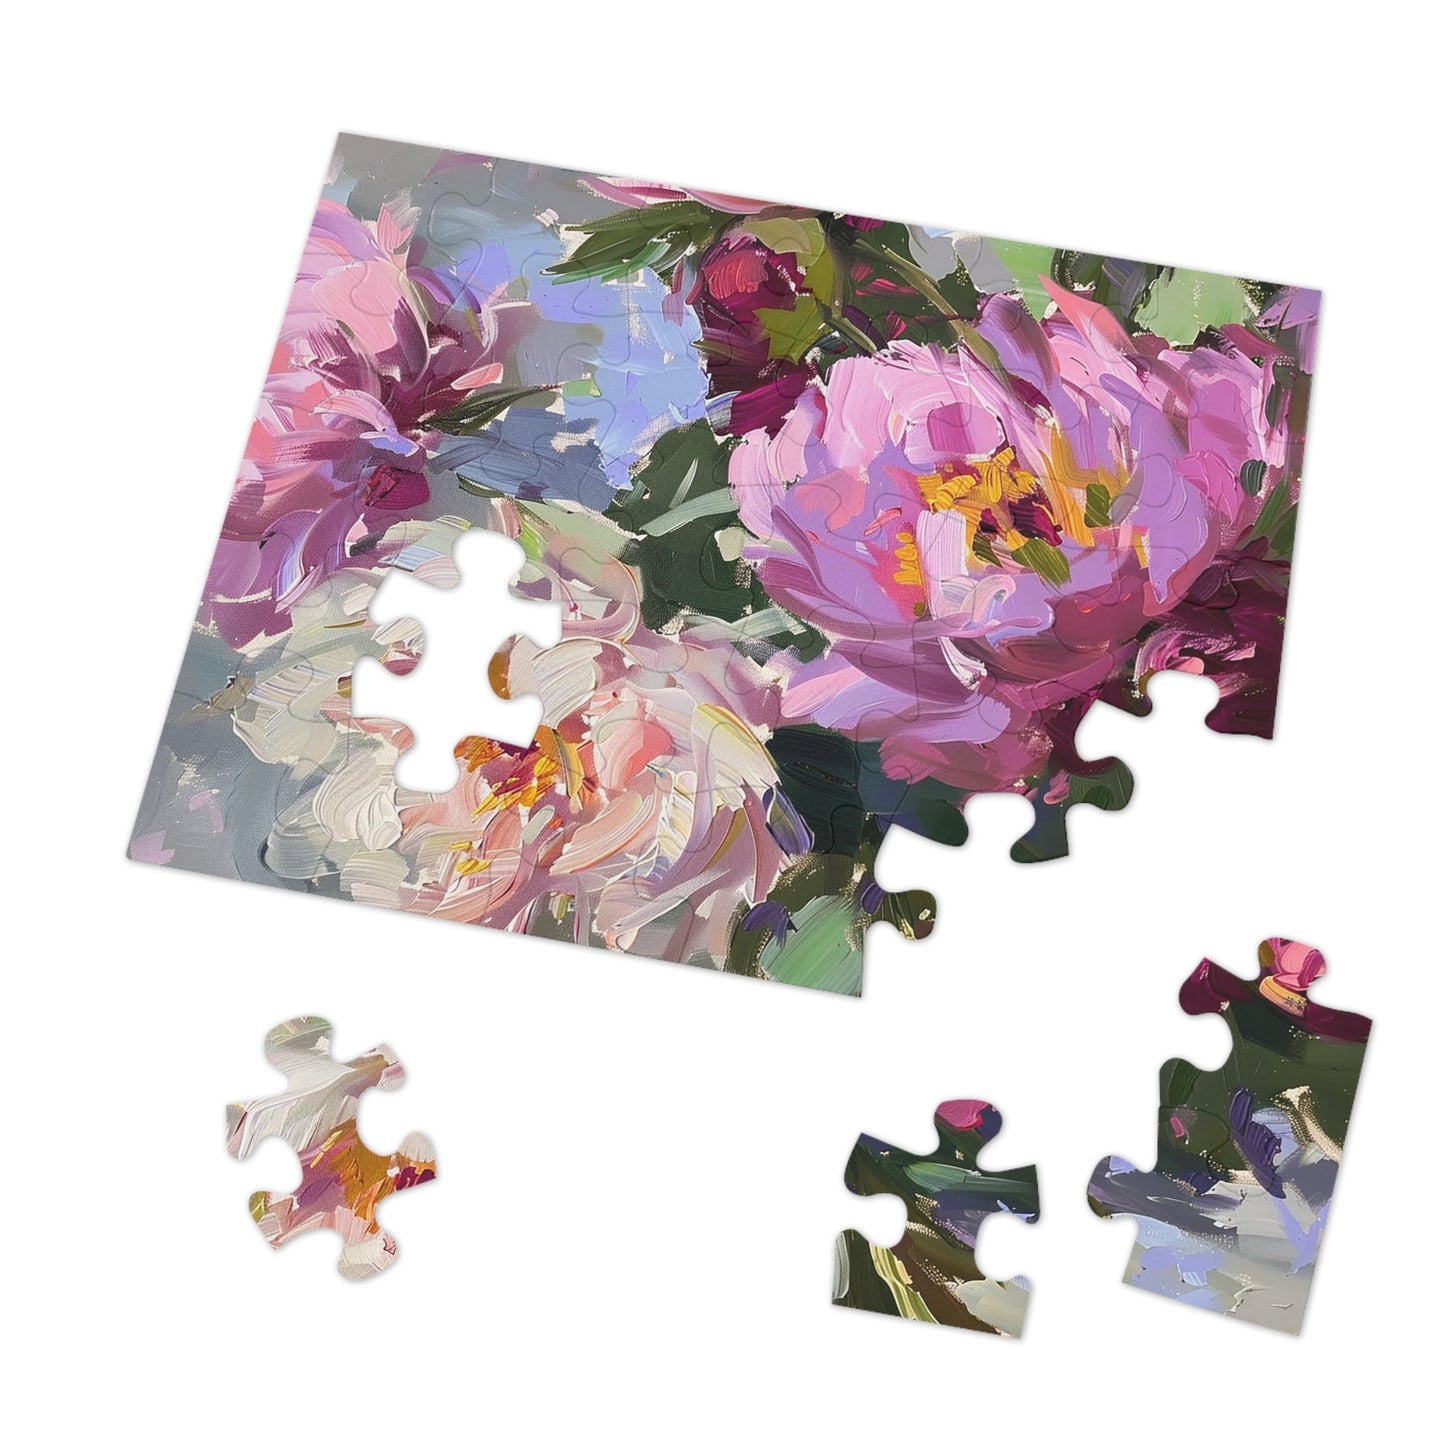 Oil Painting of Pink Flowers  Jigsaw Puzzle (30, 110, 252, 500,1000-Piece)